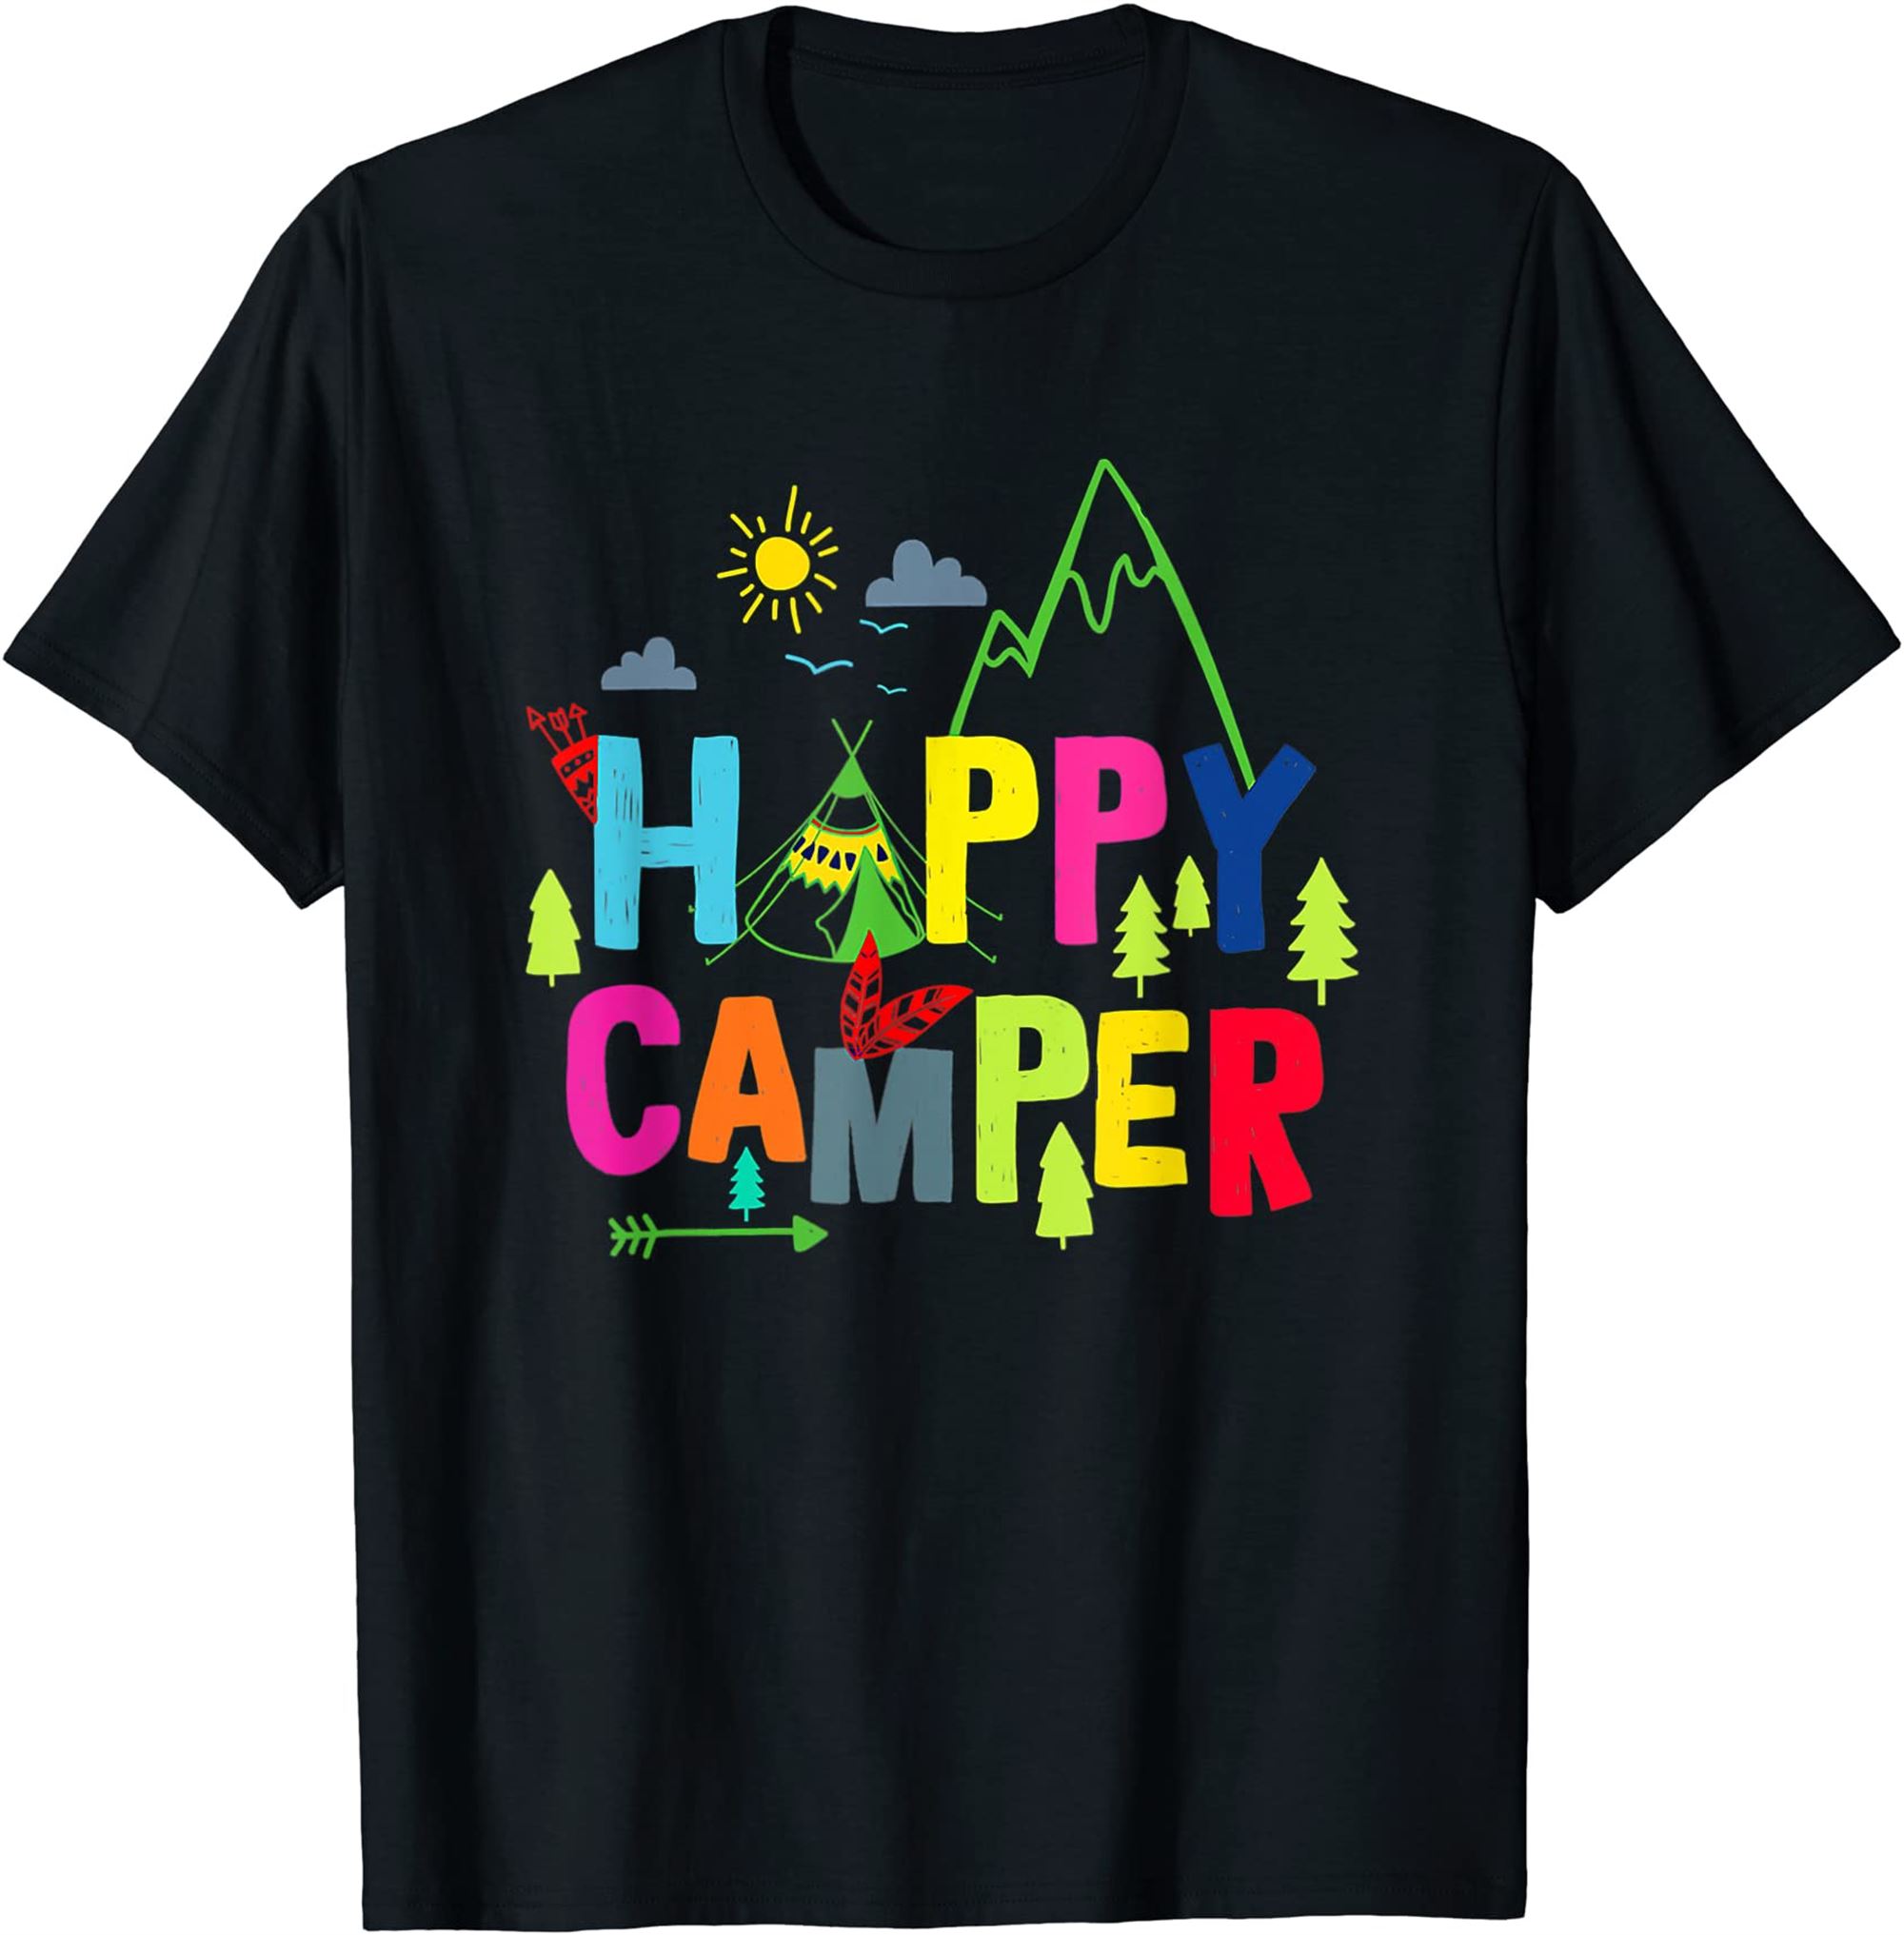 Happy Camper Camping Funny Gift Men Women Kids T-shirt Full Size Up To 5xl